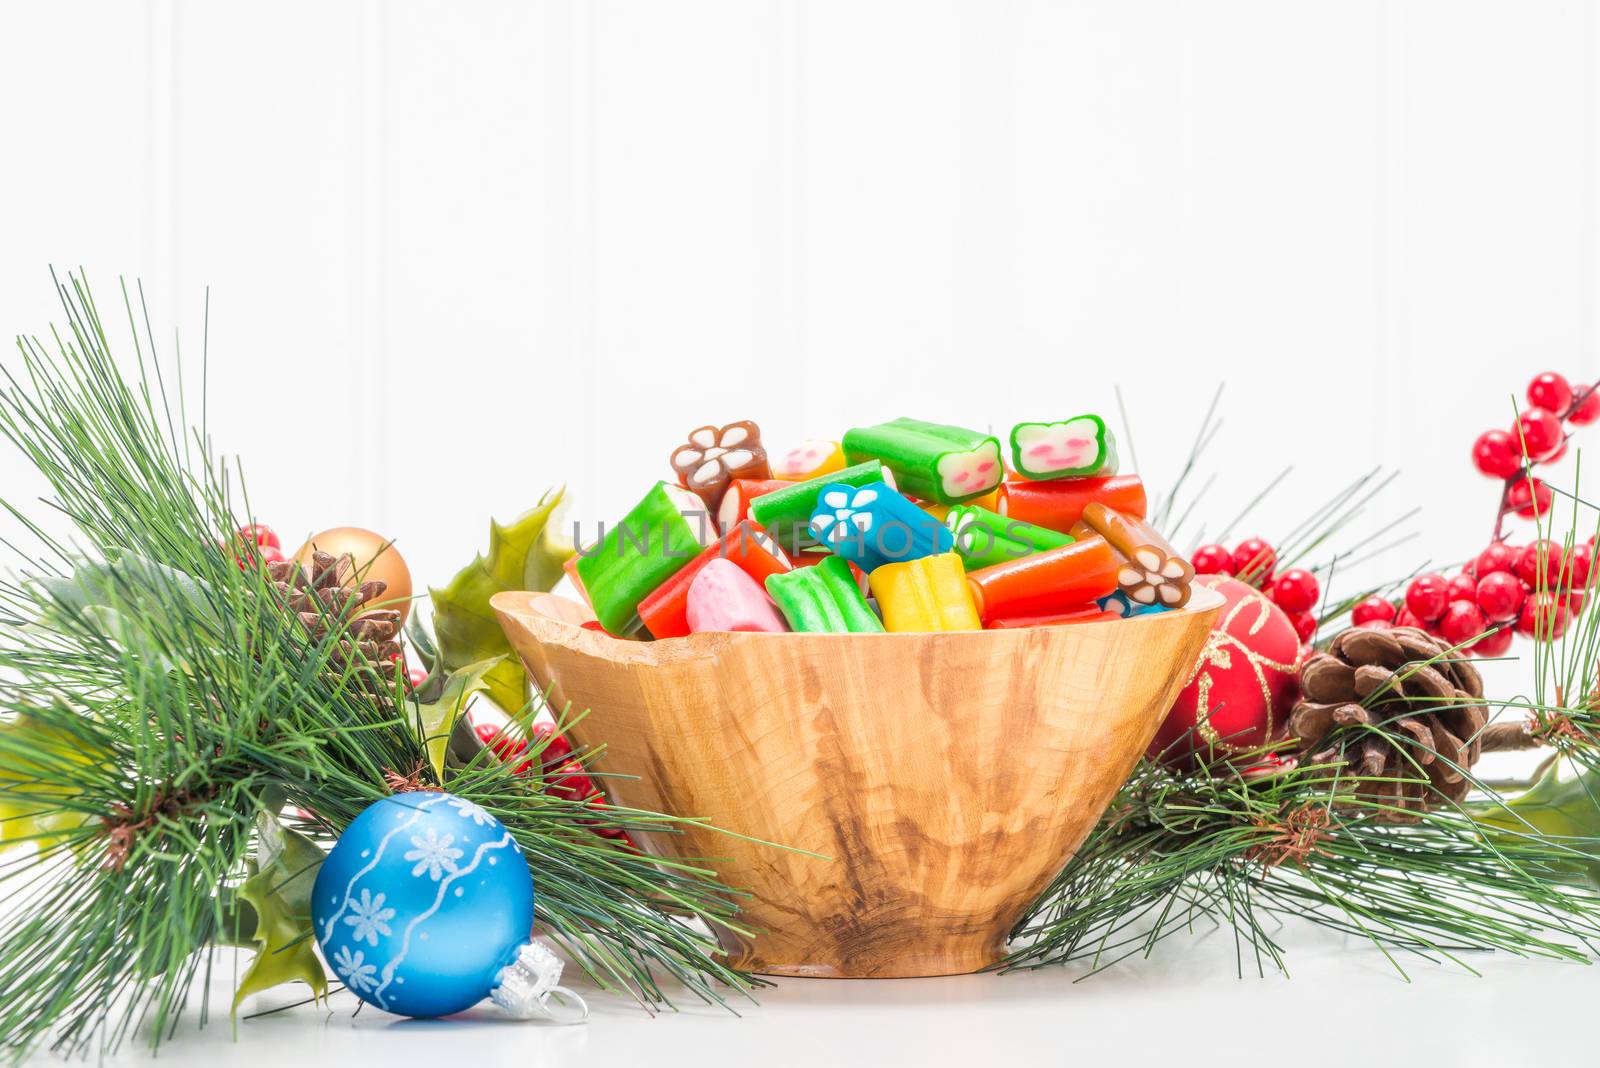 Bowl of colorful candy with a festive seasonal background.